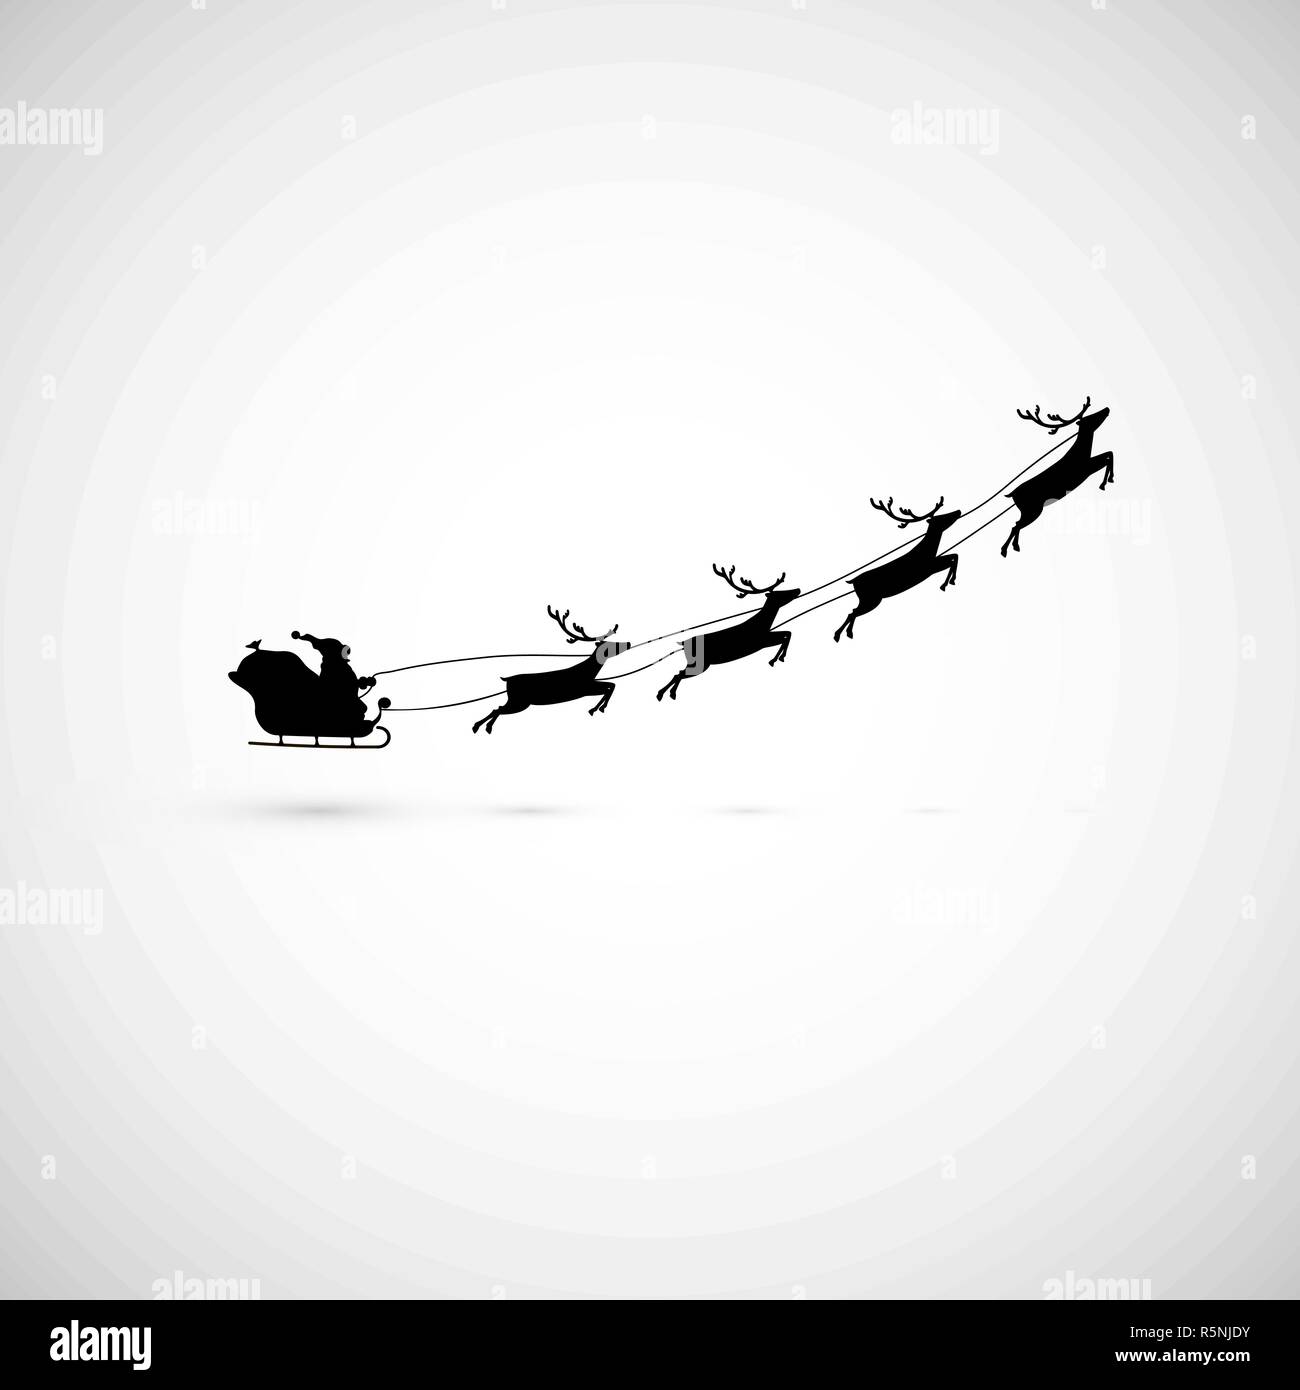 Santa on a sleigh with reindeers fly up. vector illustration Stock Vector